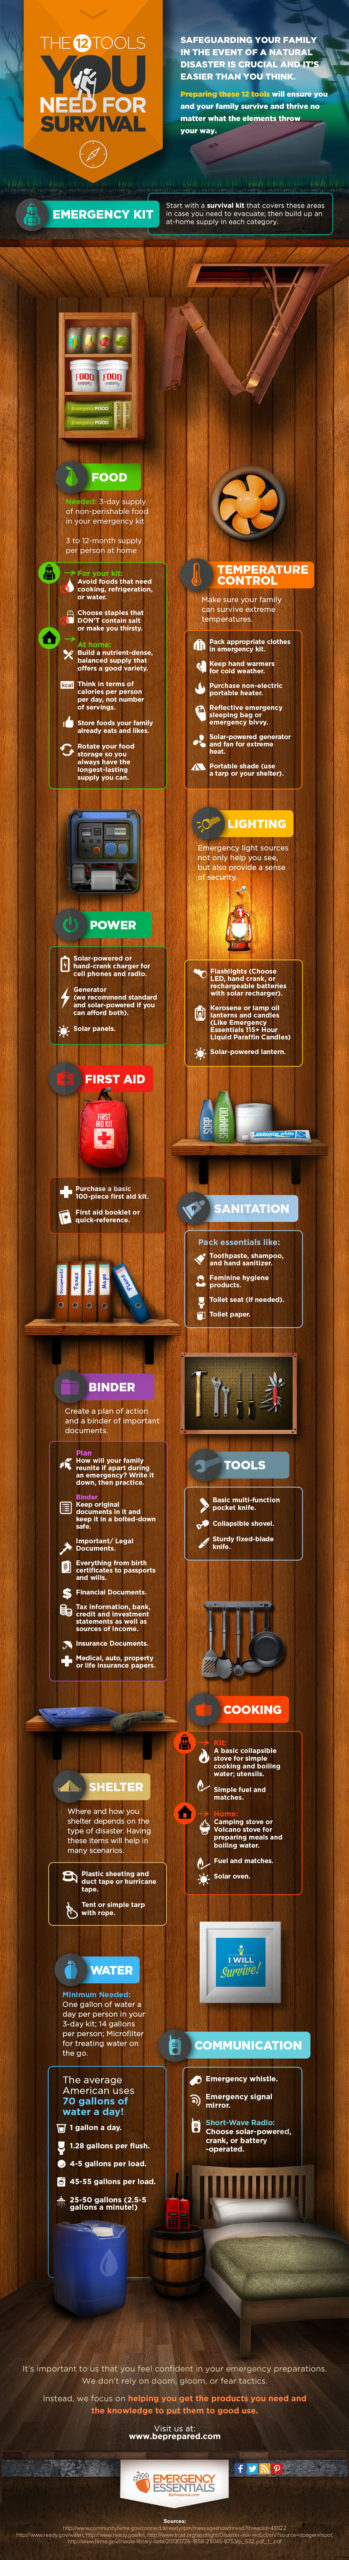 The 12 Tools You Need For Survival [Infographic]